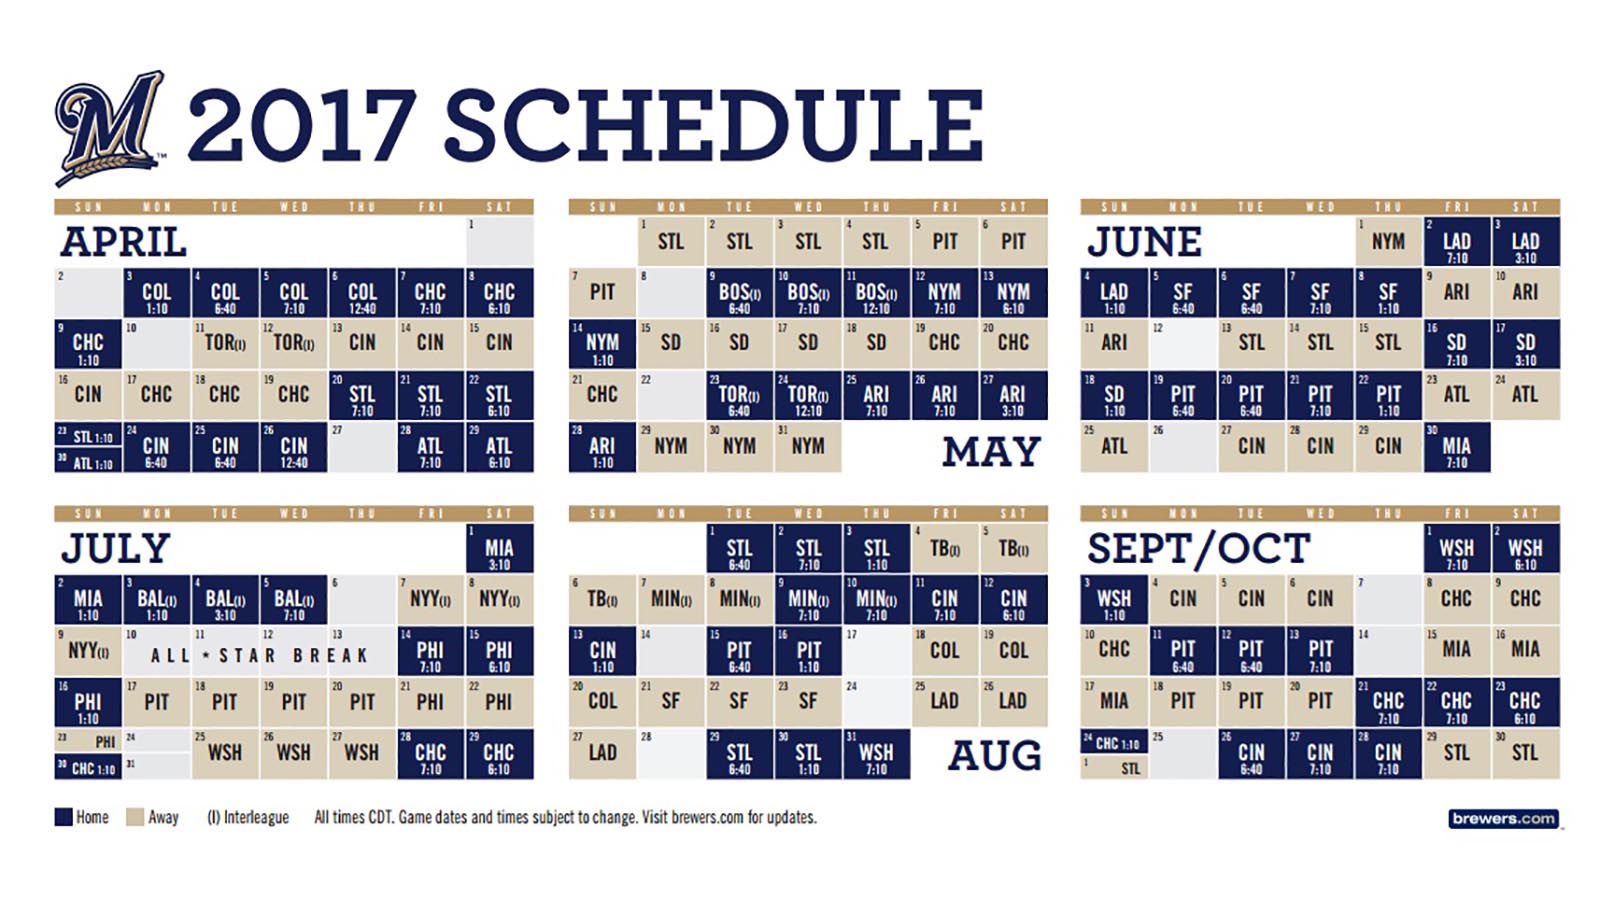 Brewers announce 2017 schedule, open at home FOX Sports